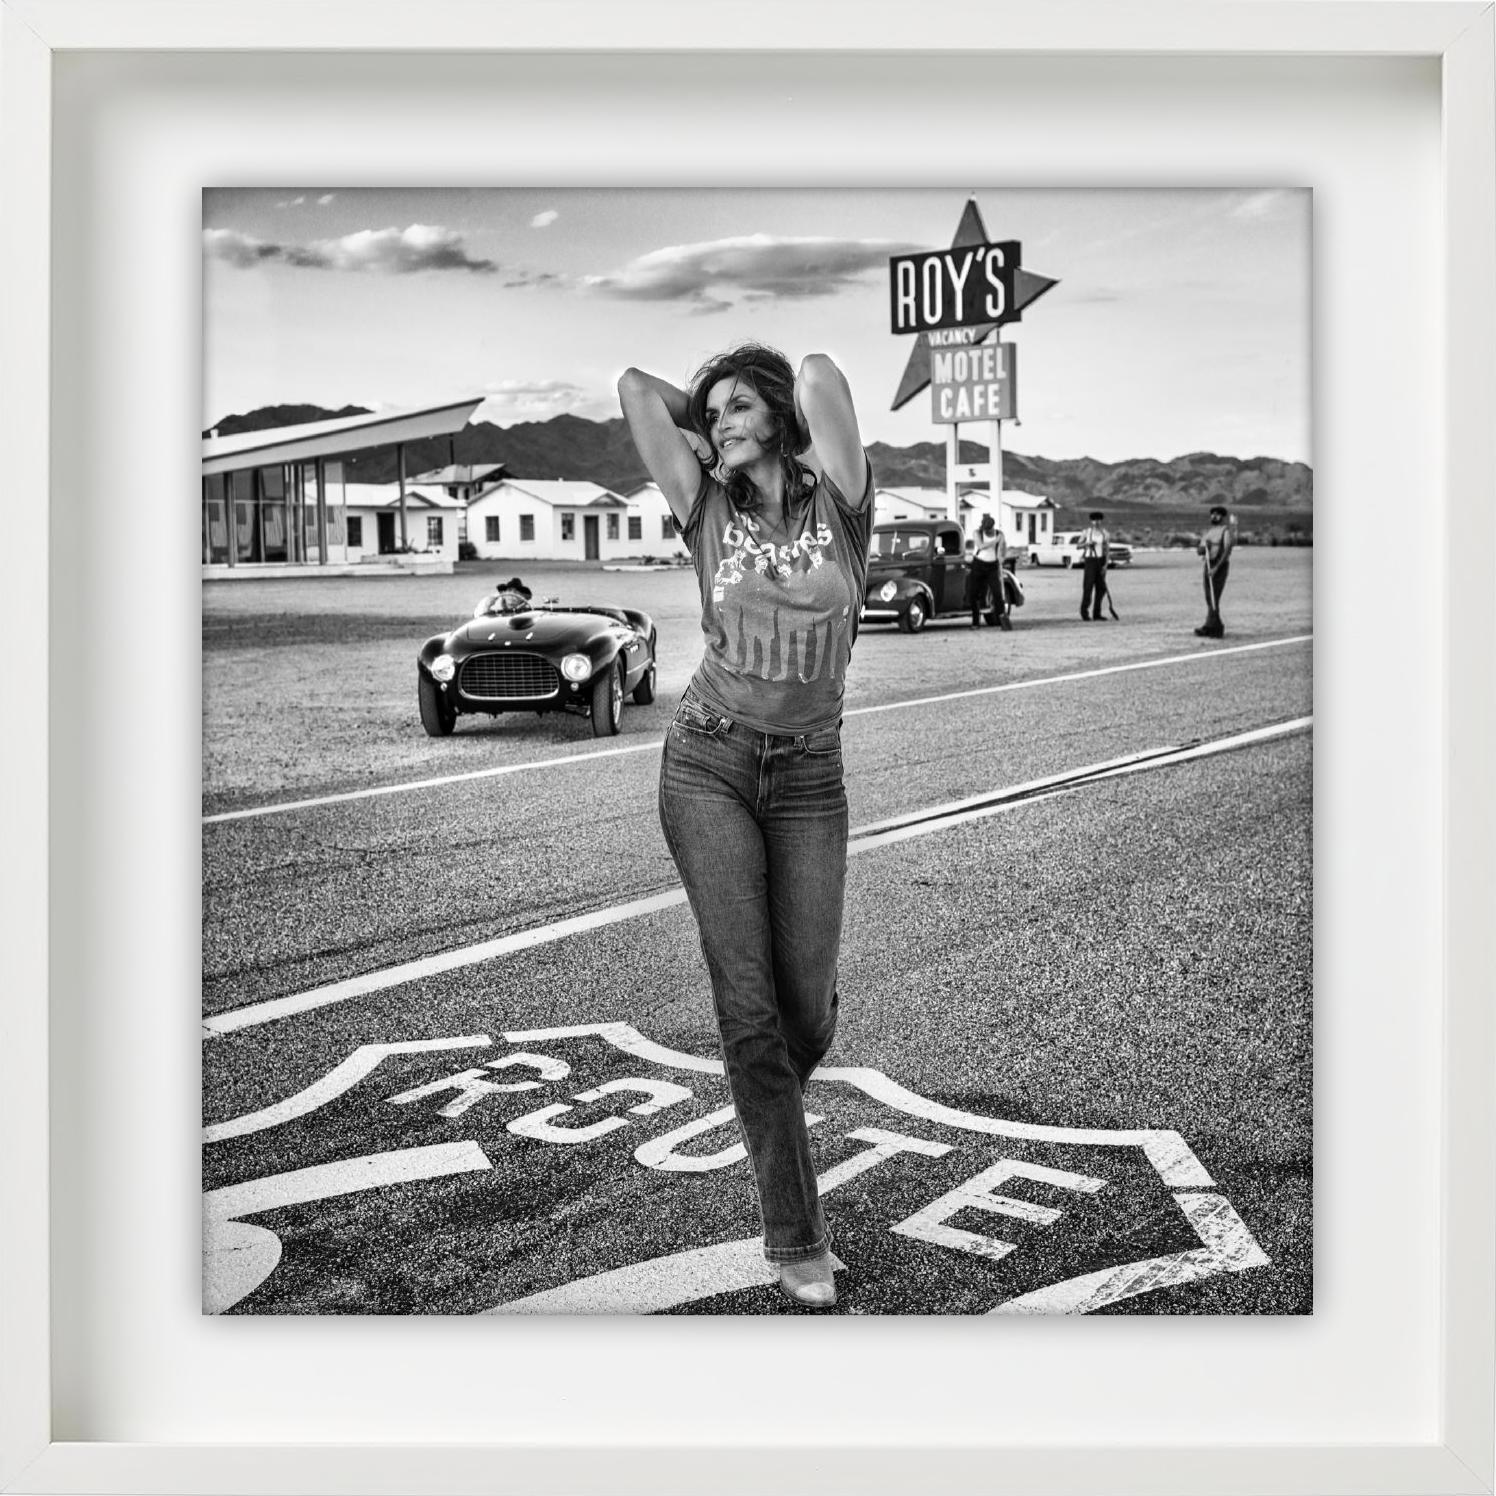 Roy's - Supermodel Cindy Crawford walking in front of 1950s motel on route 66 - Contemporary Photograph by David Yarrow